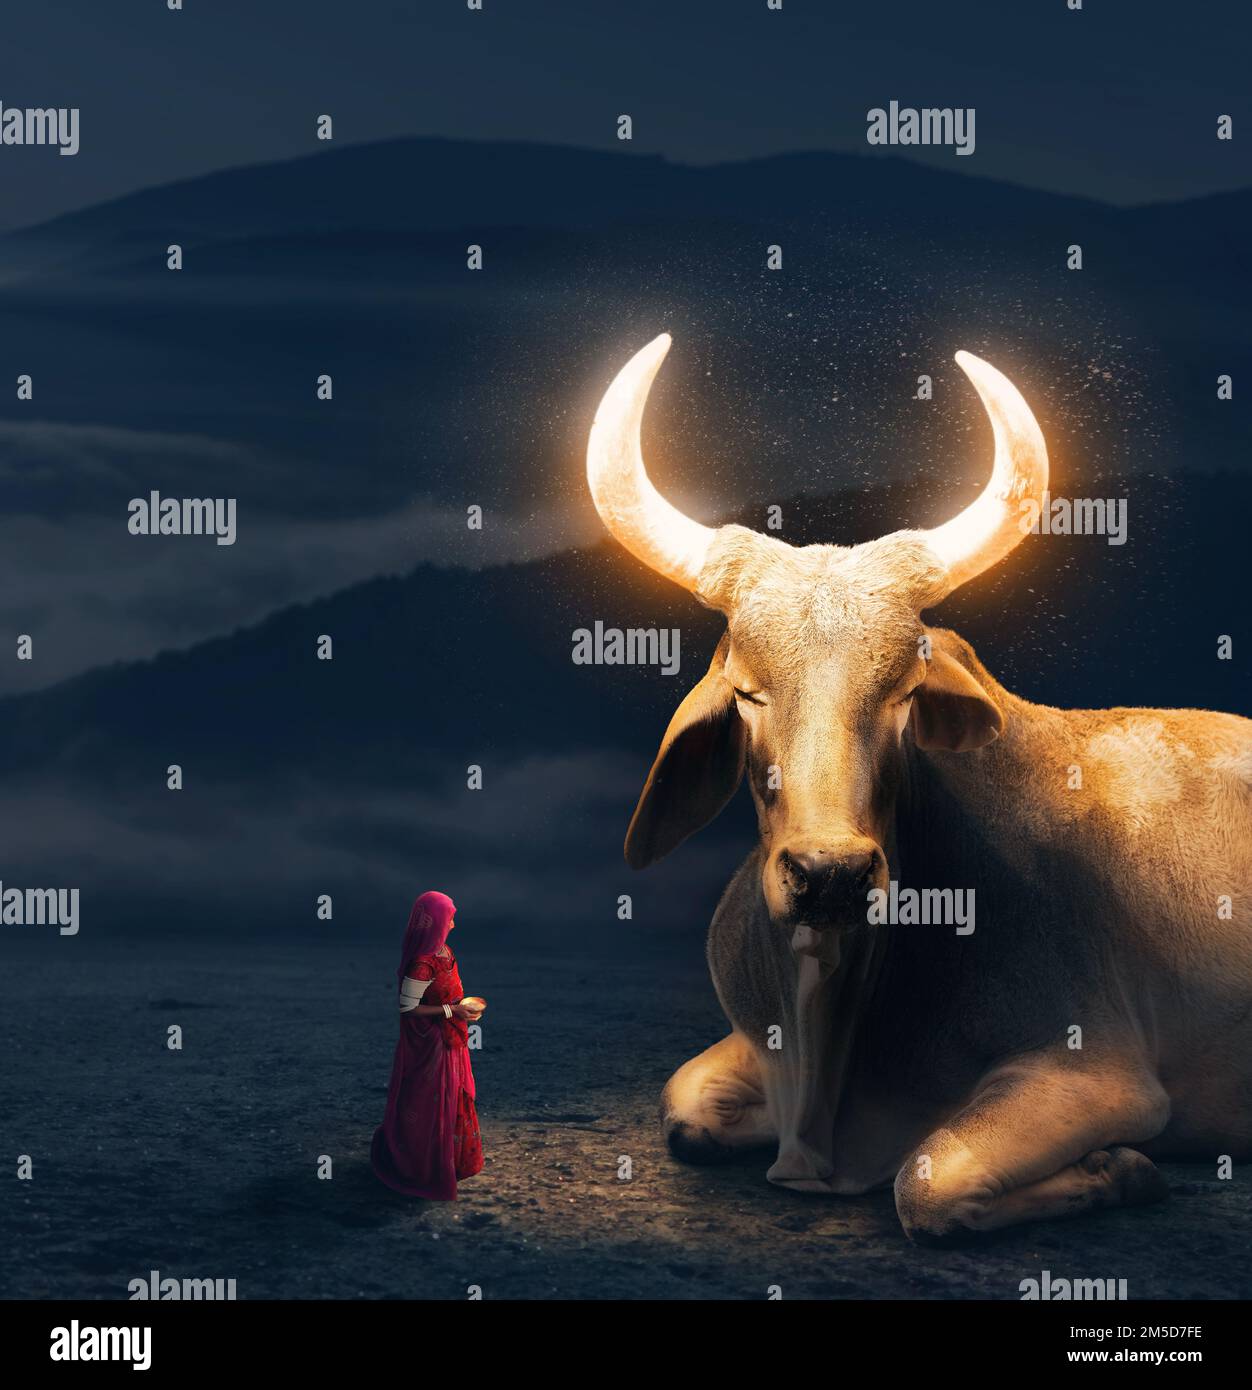 Woman in red sari worships big Holy Cow with glowing golden magic horns in Rajasthan, India Stock Photo